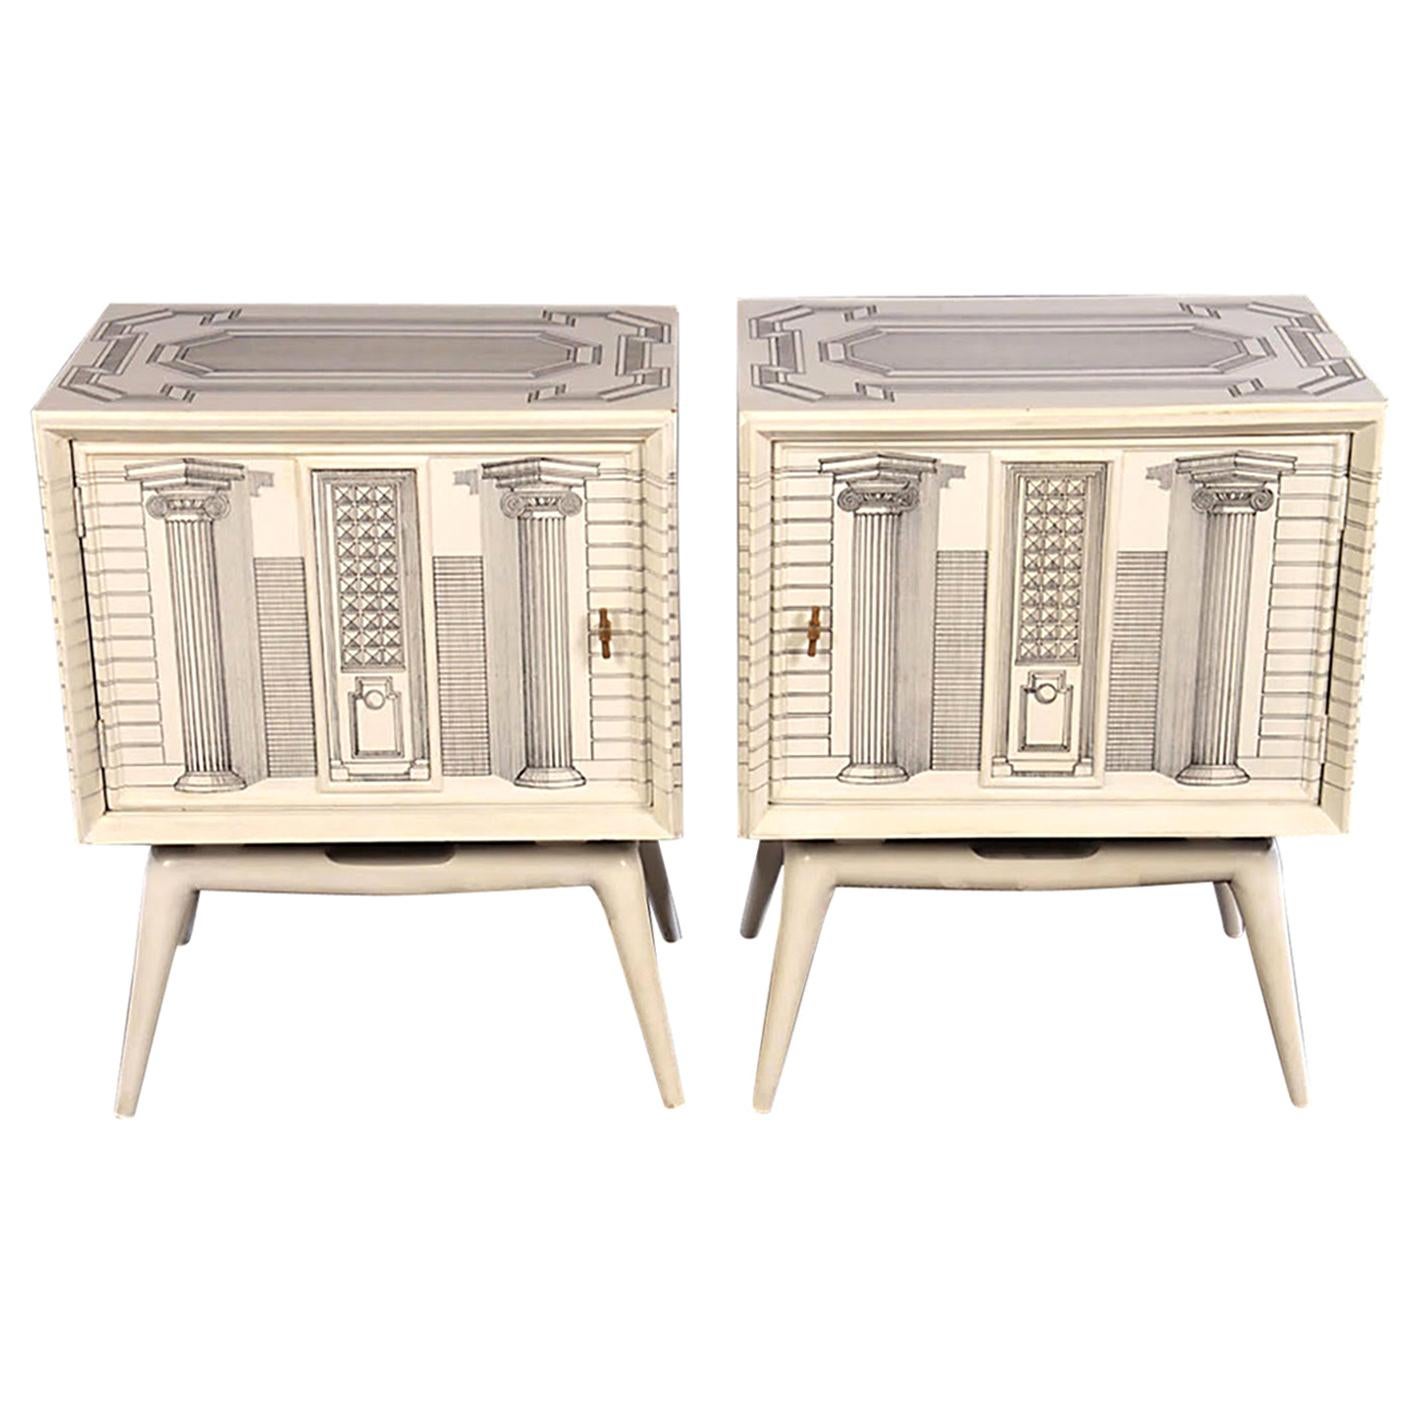 Pair of Midcentury Architectural End Tables in the Manner of Fornasetti For Sale